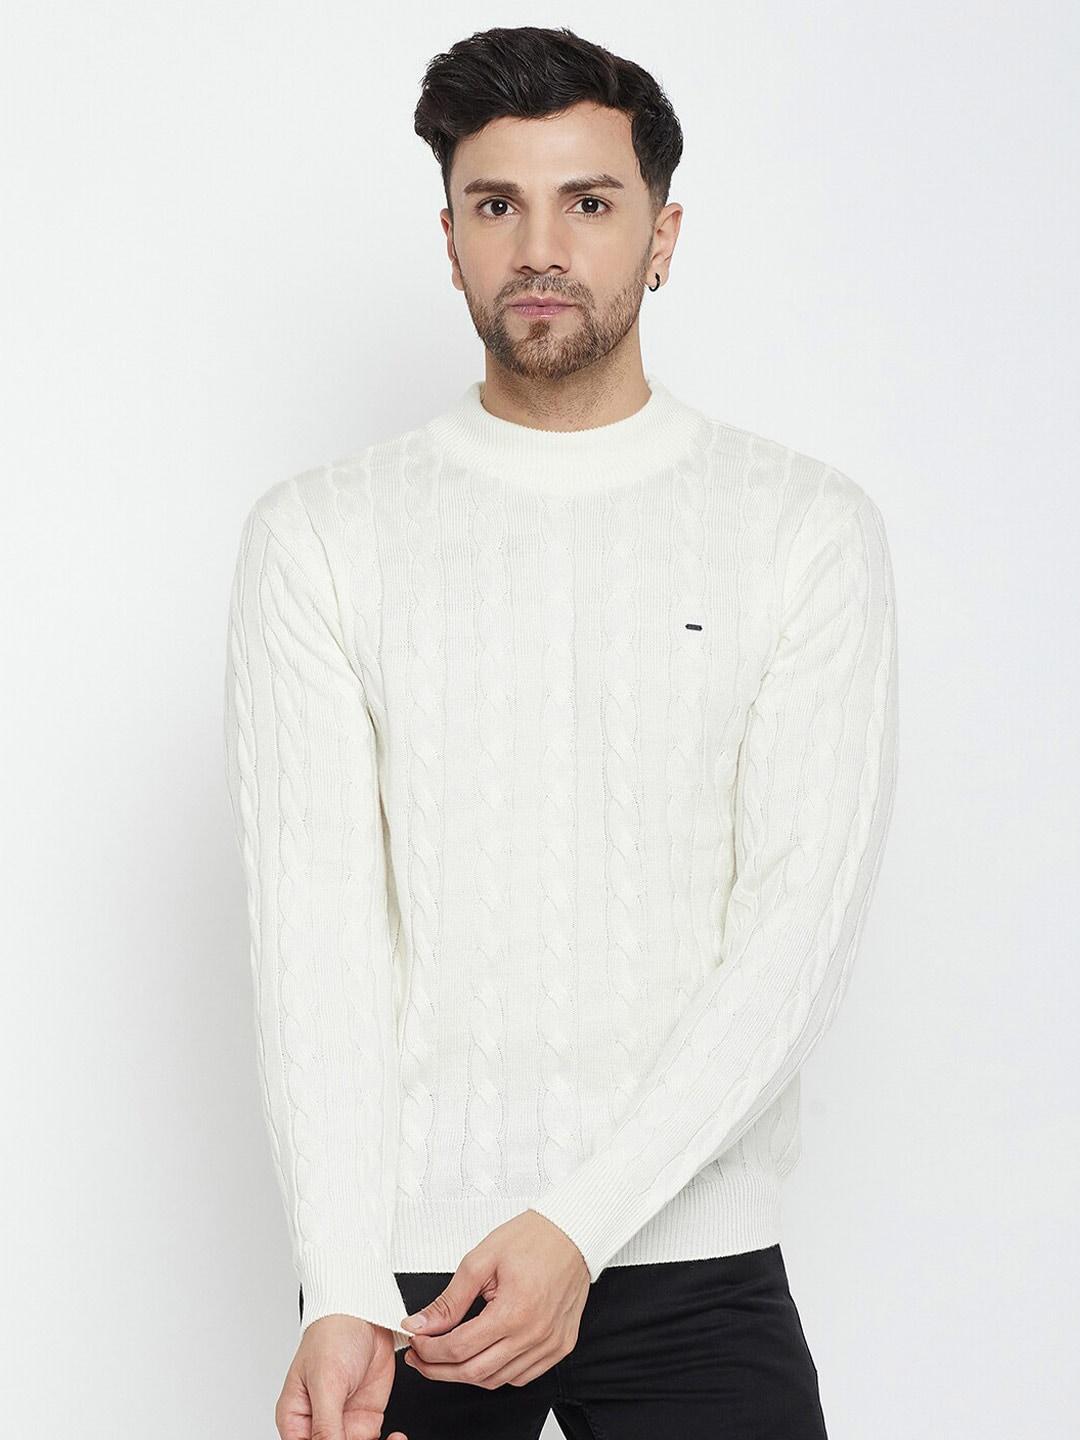 okane-cable-knit-pullover-acrylic-sweater